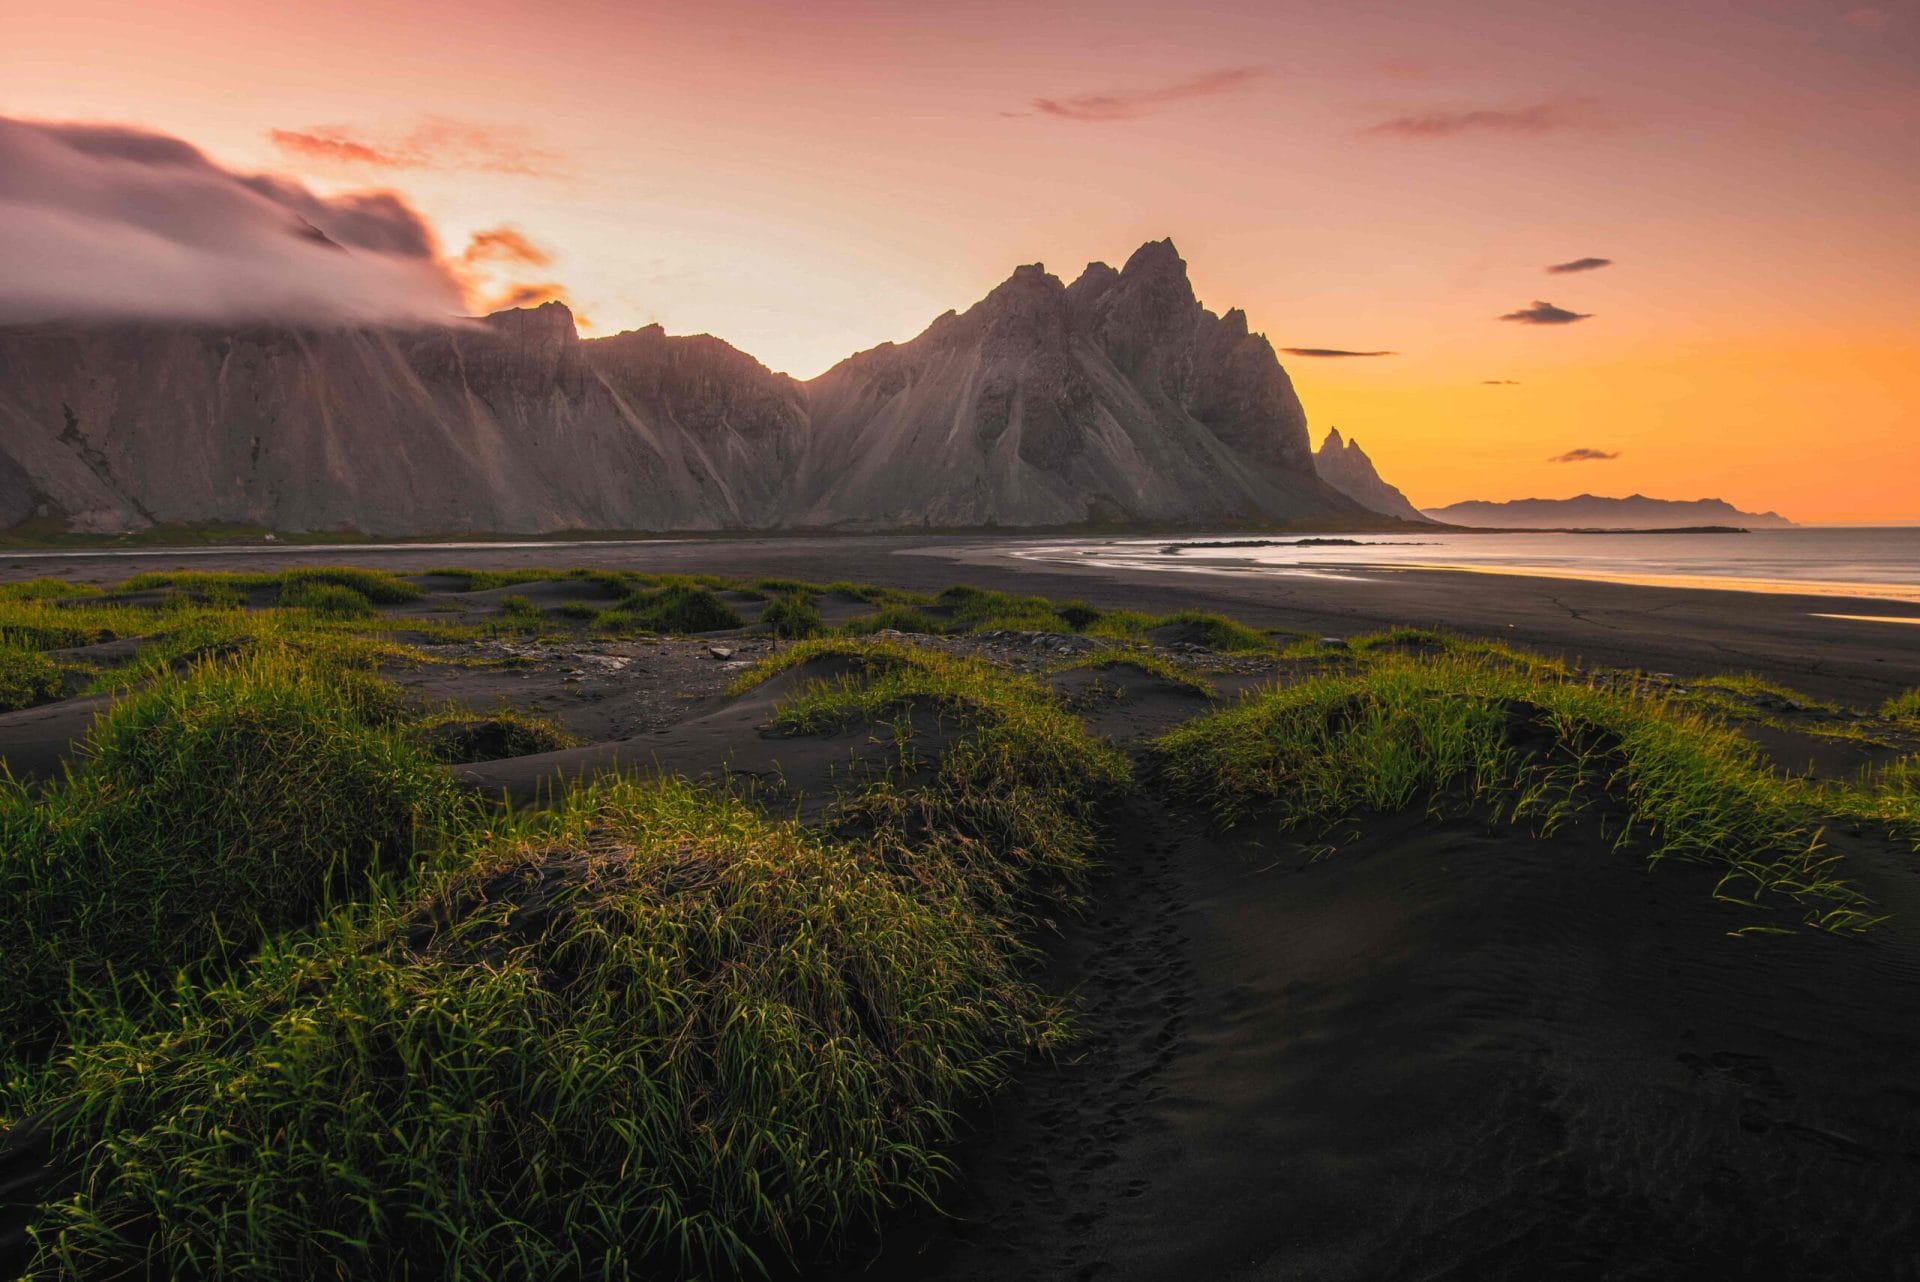 The Complete Guide to the Midnight Sun in Iceland